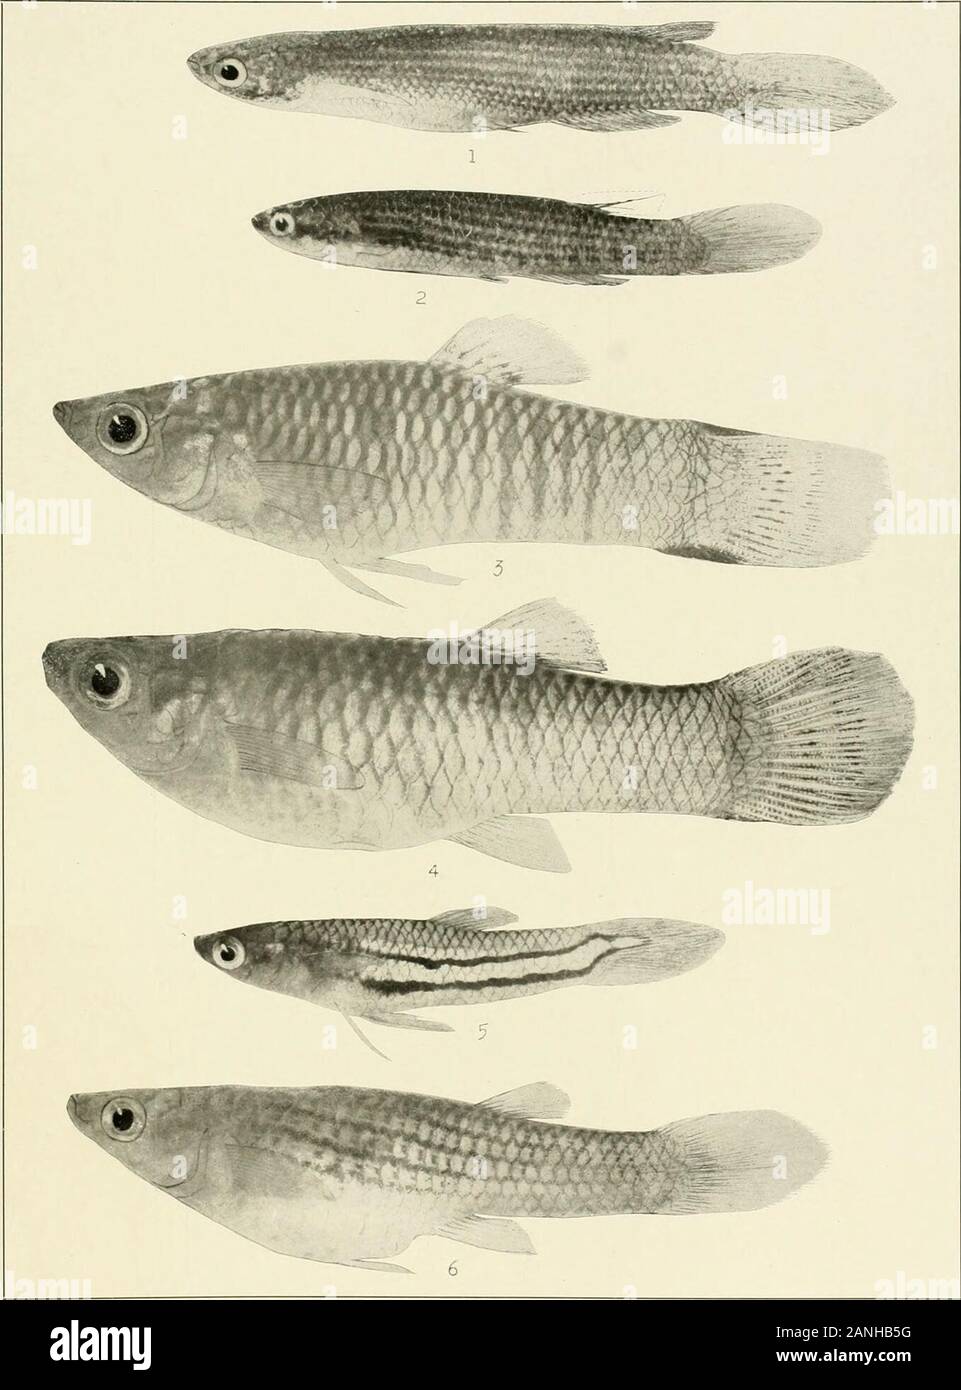 The freshwater fishes of British Guiana, including a study of the ecological grouping of species and the relation of the fauna of the plateau to that of the lowlands . 1. Rivulusbreviceps Eigenmann. (Type.) 50mm. No. 1075. 2. Rivulusholmia Eigenmann, &lt;?? (Co-type.) 63 mm. No. 1077. 3. Rivulus holmice Eigenmann, . Type.) 77 mm. No. L076. 4. Rivuluswaimacui Eigenmann, &lt;?. (Cotype.) 88 mm. No. 1079. 5. Rivulus waimacui Eigenmann, ?. (Type.)79 mm. No. 1078. 6. Rivuhis stagnatus Eigenmann, o1. (Cotype.) 42 mm. No. 1083. 7. Rivulus stag-natus Eigenmann, v. (Type.) 44 mm. No. L082. Memoirs Carn Stock Photo